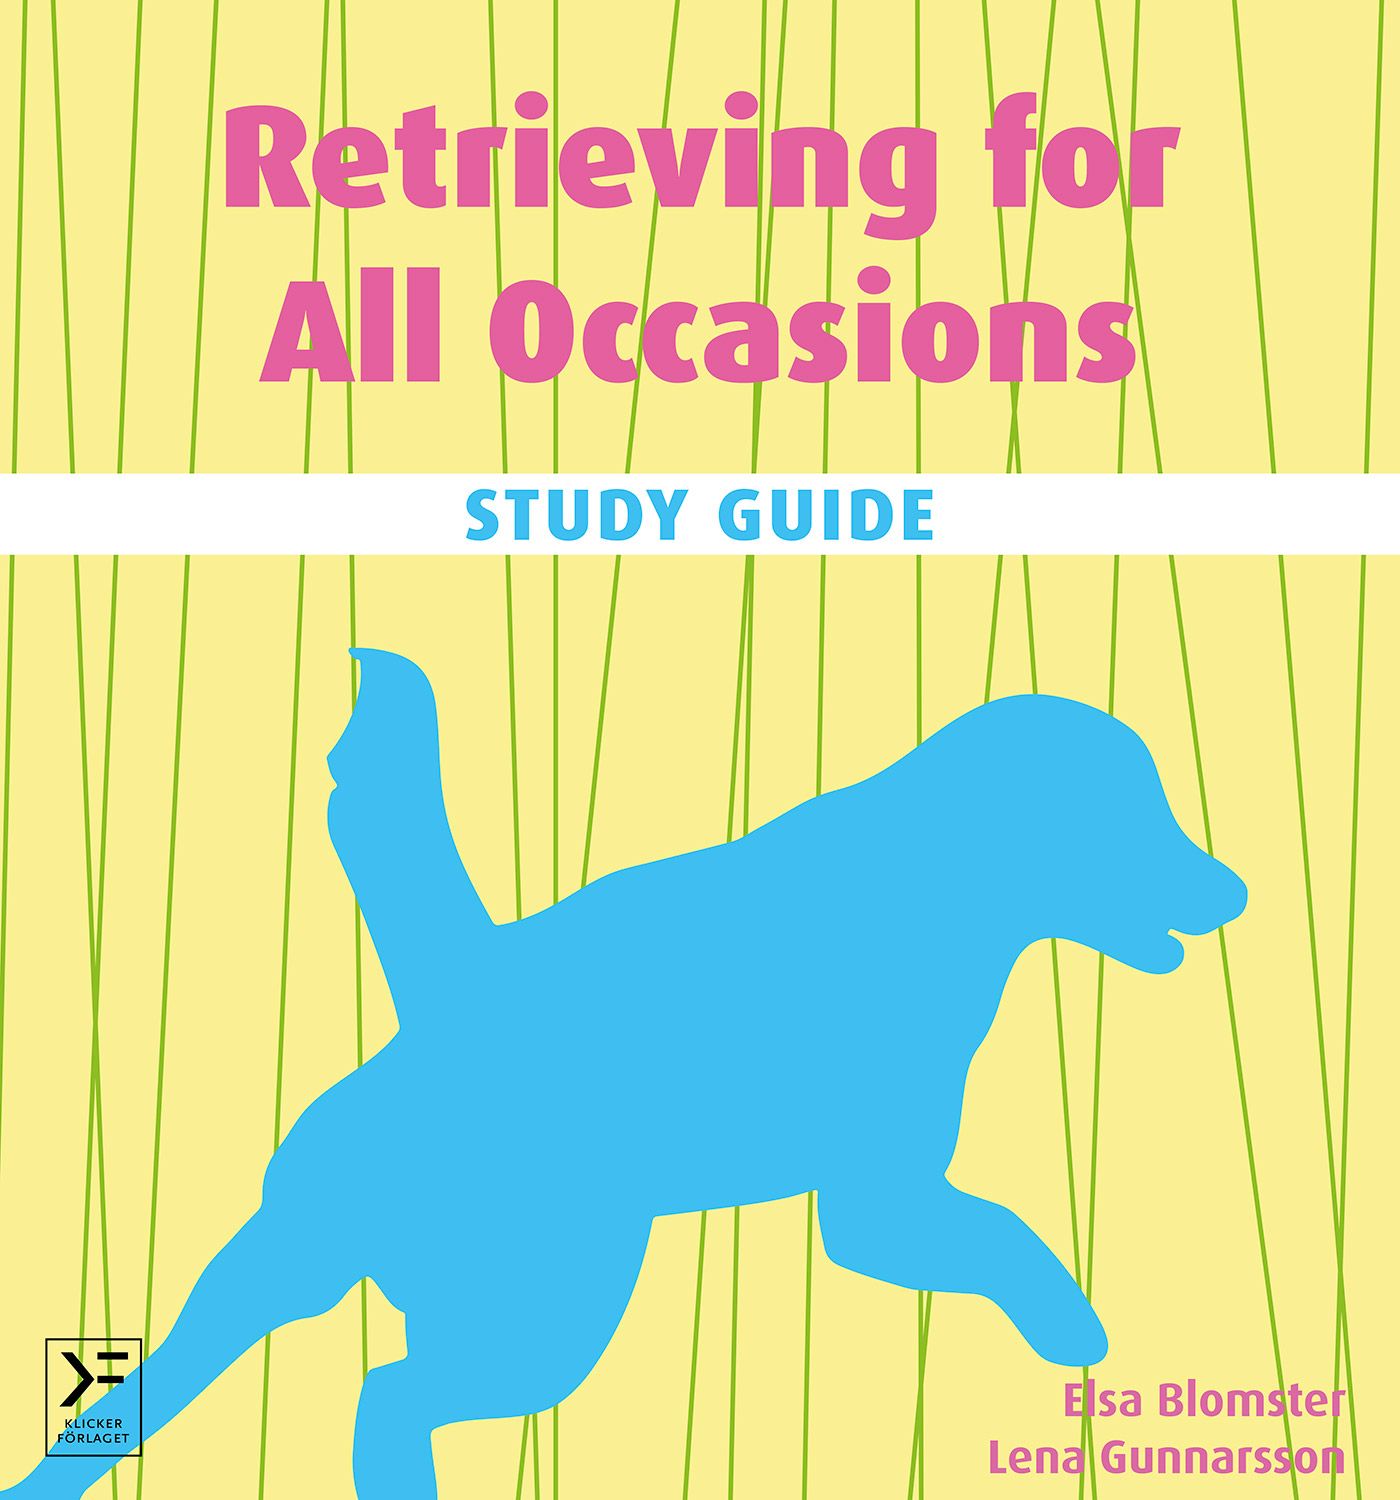 Retrieving for All Occasions - Study Guide, eBook by Elsa Blomster, Lena Gunnarsson